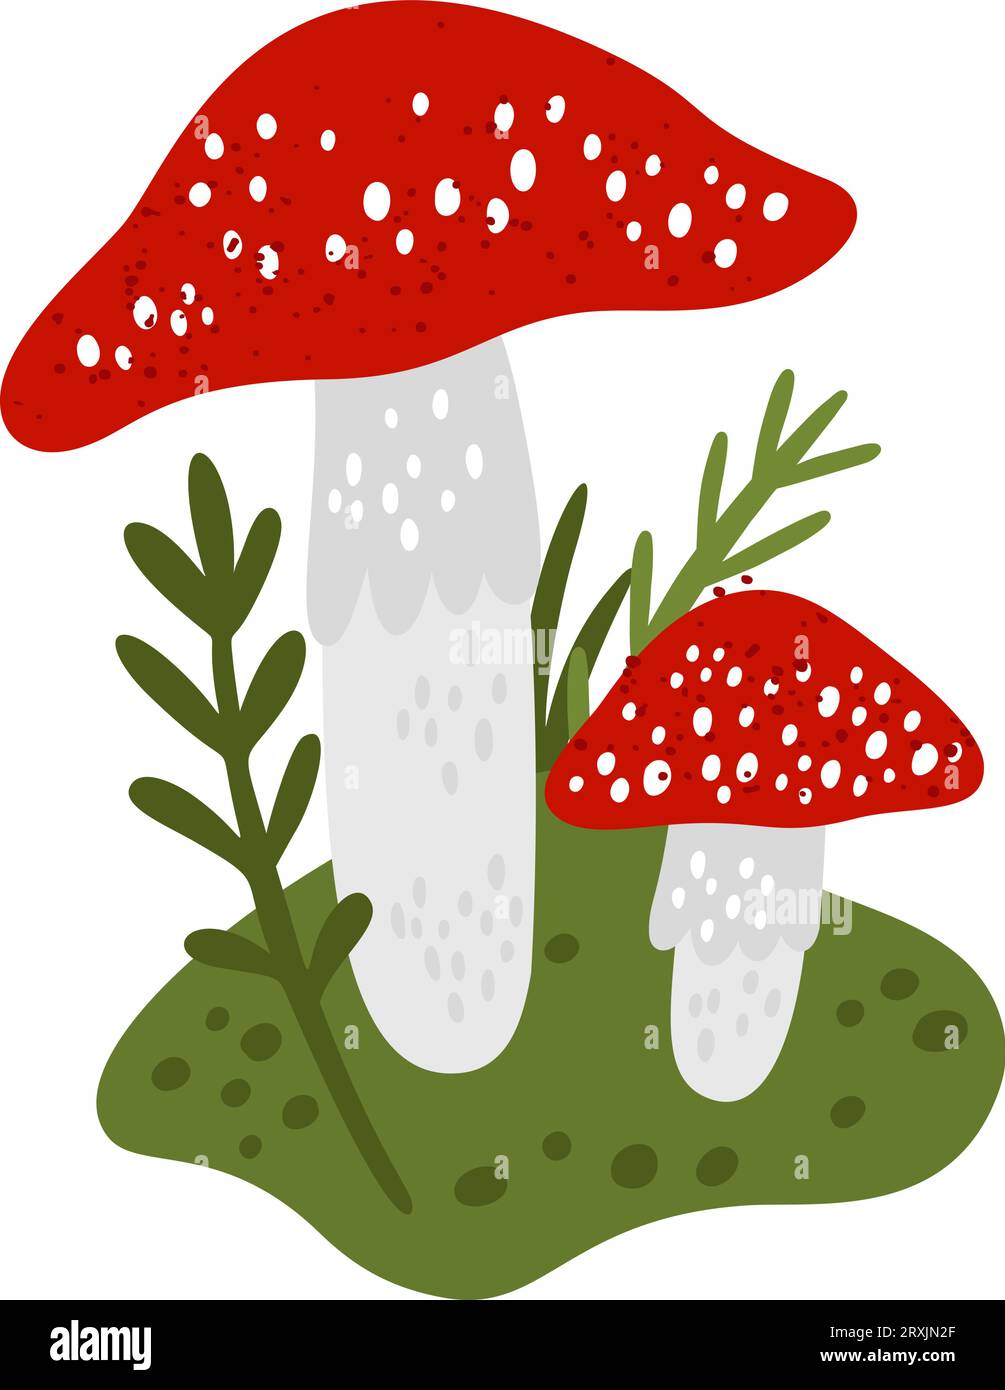 Forest mushroom. Fly agaric. Woodland nature. Poisonous and toxic fungi. Inedible fungus. Spotted red cup. Amanita muscaria and herbs. Magic Stock Vector